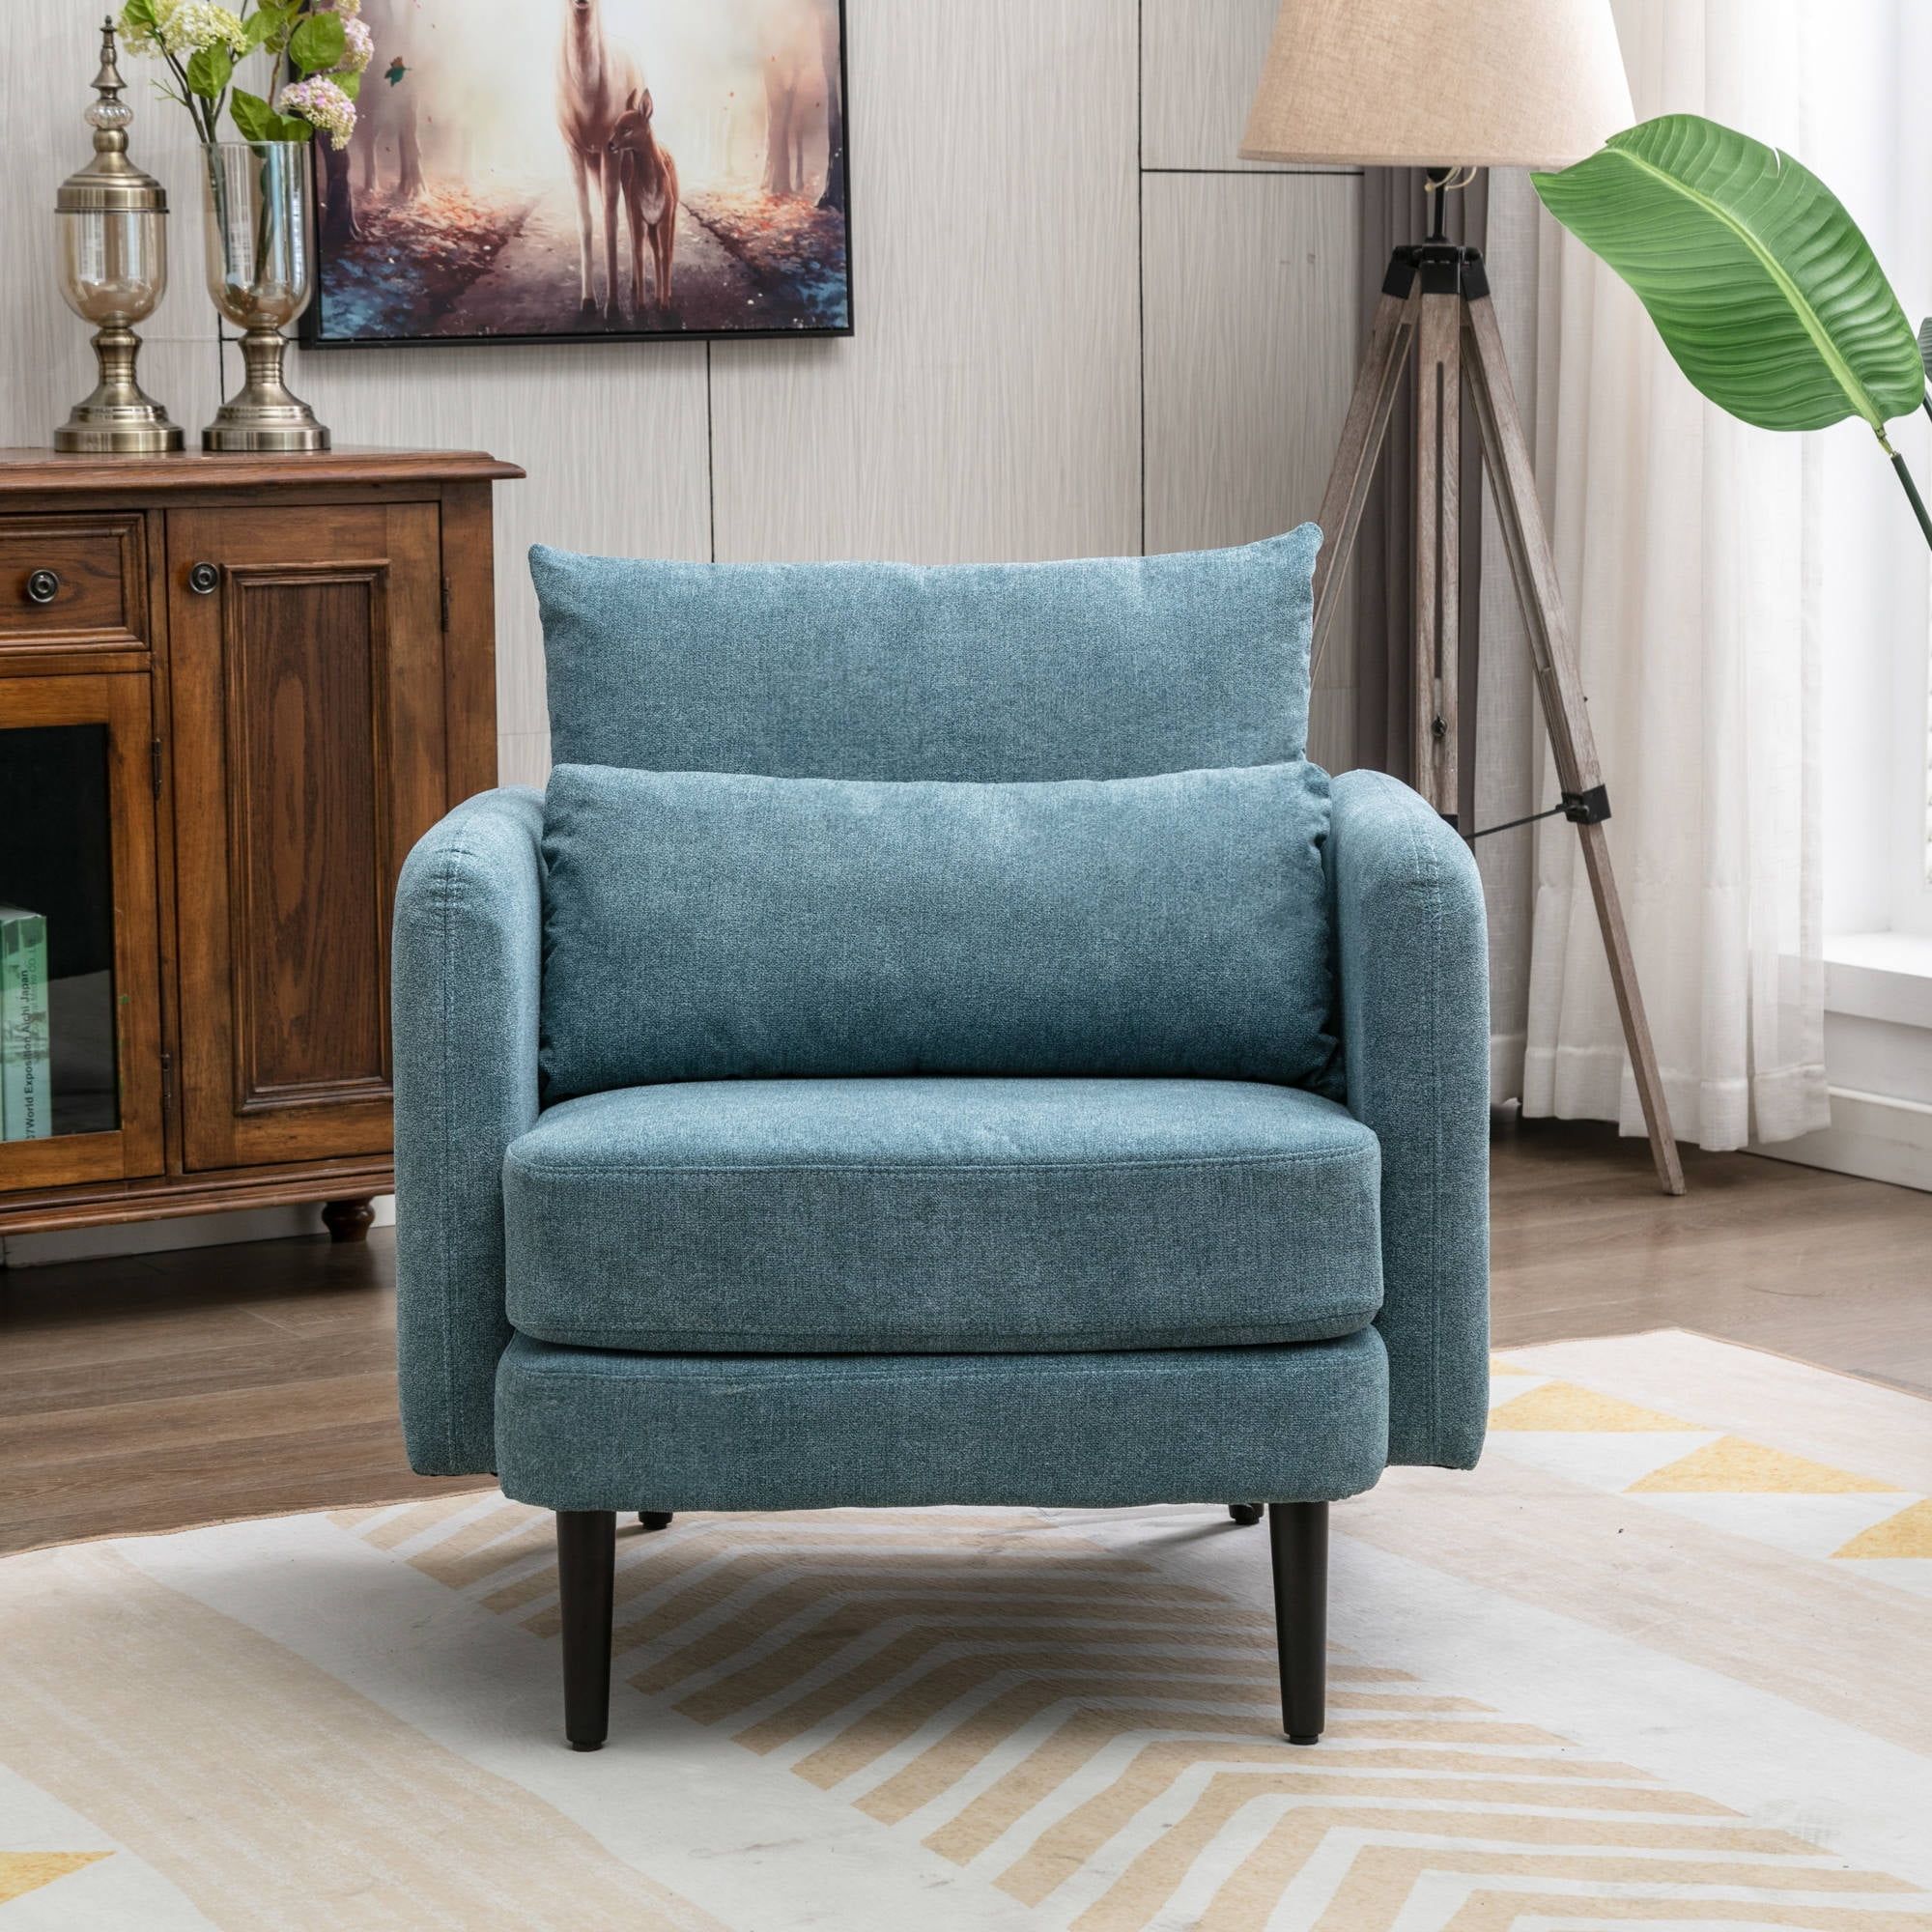 Buy Arcticscorpion Armchair, Accent Arm Chair, Mid Century Modern Comfy Within Comfy Reading Armchairs (View 9 of 20)